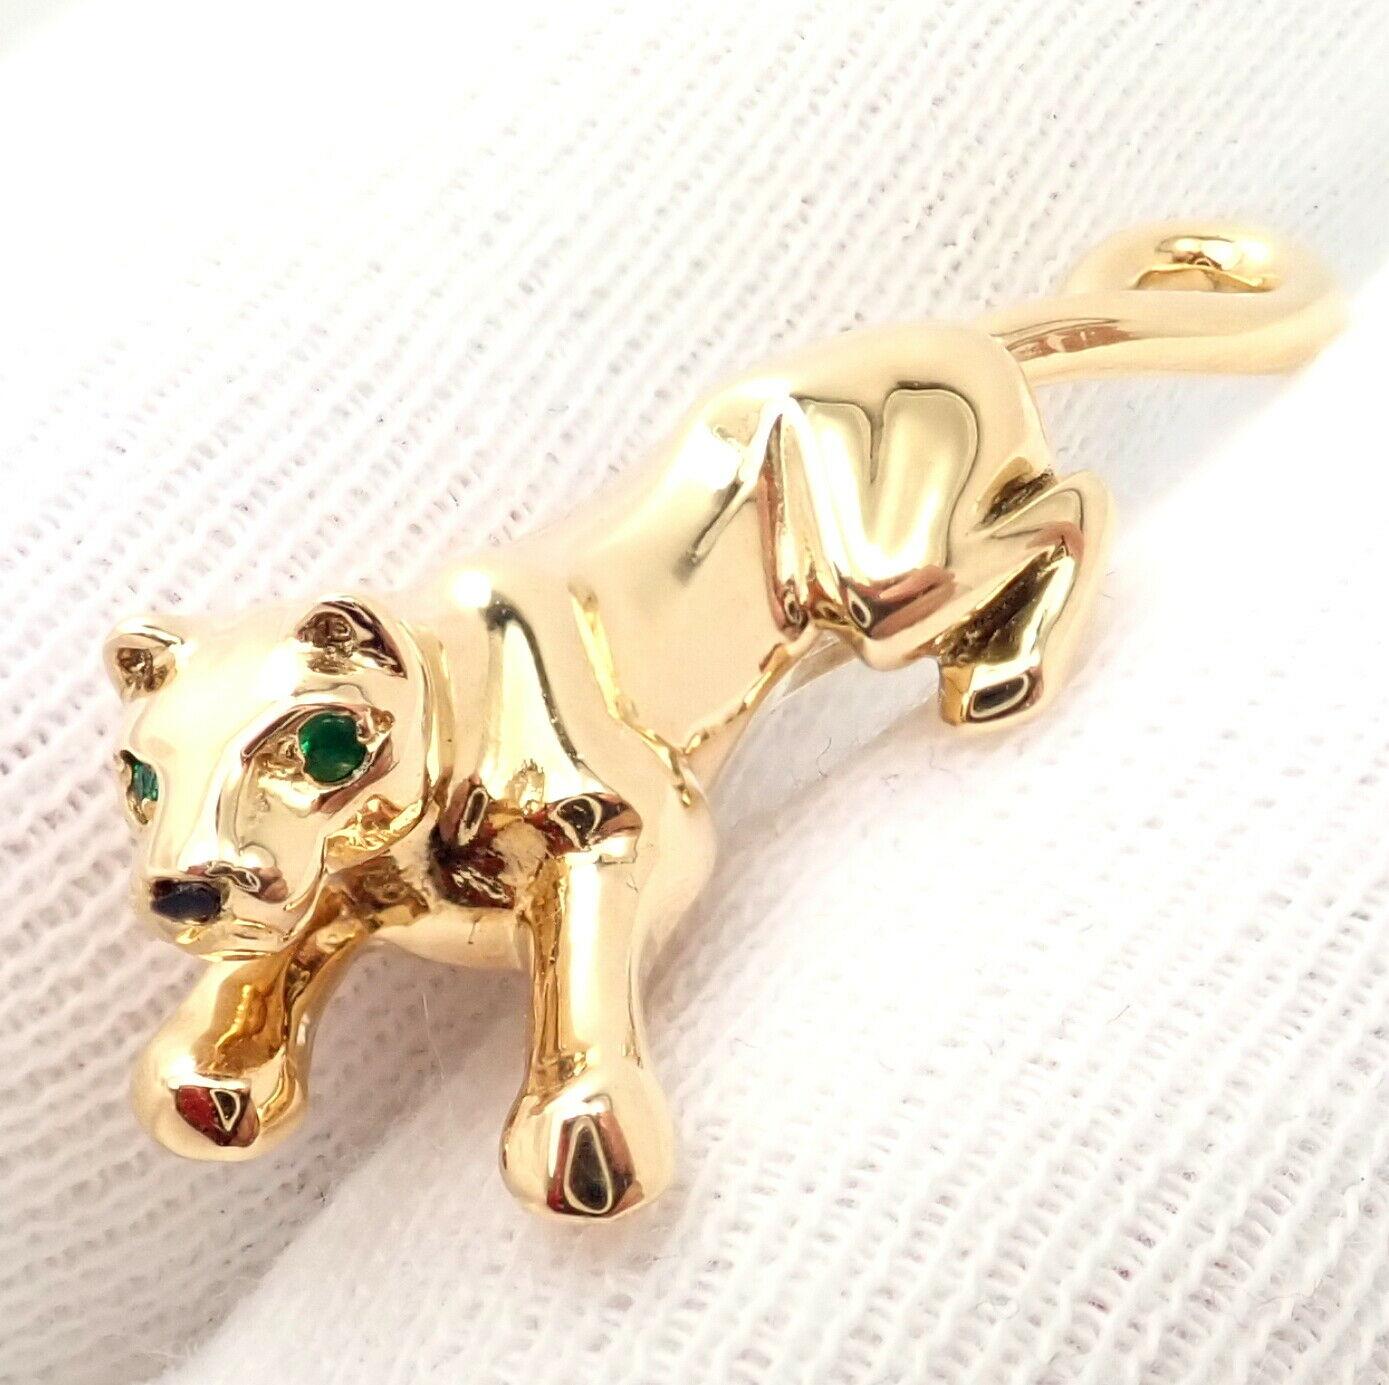 Cartier Panther Panthere Emerald Black Onyx Tie Lapel Yellow Gold Pin Brooch In Excellent Condition For Sale In Holland, PA